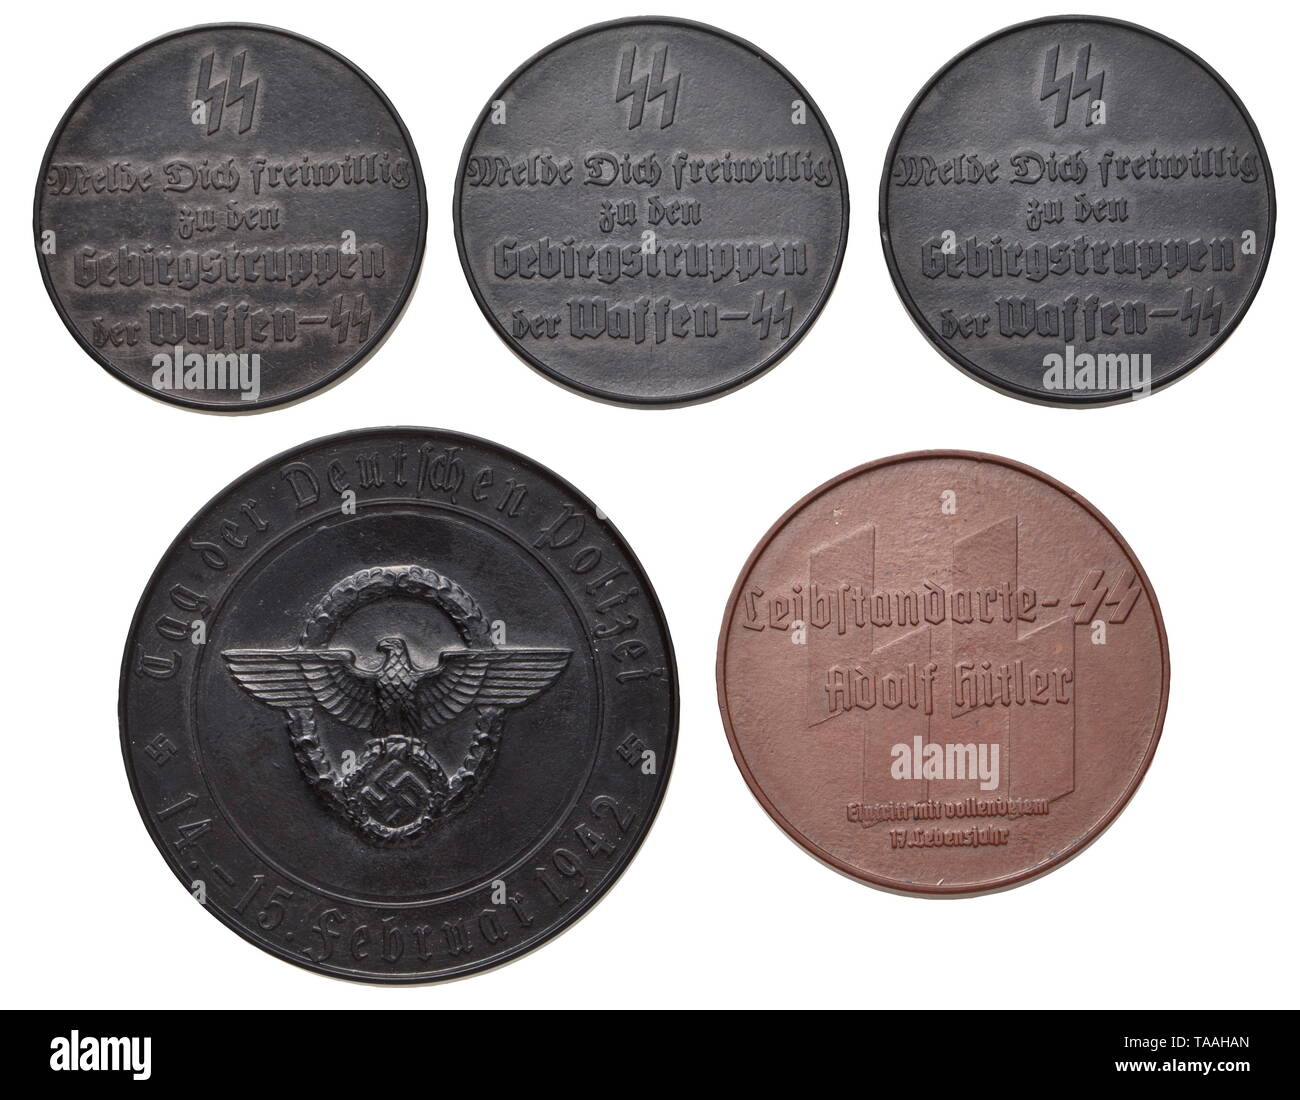 Mountain troops of the Waffen-SS - five Bakelite plaques Three plaques with inscription (tr.) 'SS Sign up voluntarily for the mountain troops of the Waffen-SS', views of Murnau, Inzell and Kiefersfelden on the reverse, diameter of each circa 40 mm. Furthermore, a brown plaque inscribed (tr.) 'SS Leibstandarte-SS Adolf Hitler enlistment at the age of 17', the reverse with a portrait of Hitler, diameter 45 mm. Plaque (tr.) 'Day of the German police force - 14-15 February 1942', Gau Kärnten Villach on the reverse, diameter 55 mm. Slight traces of age. historic, historical, 20t, Editorial-Use-Only Stock Photo